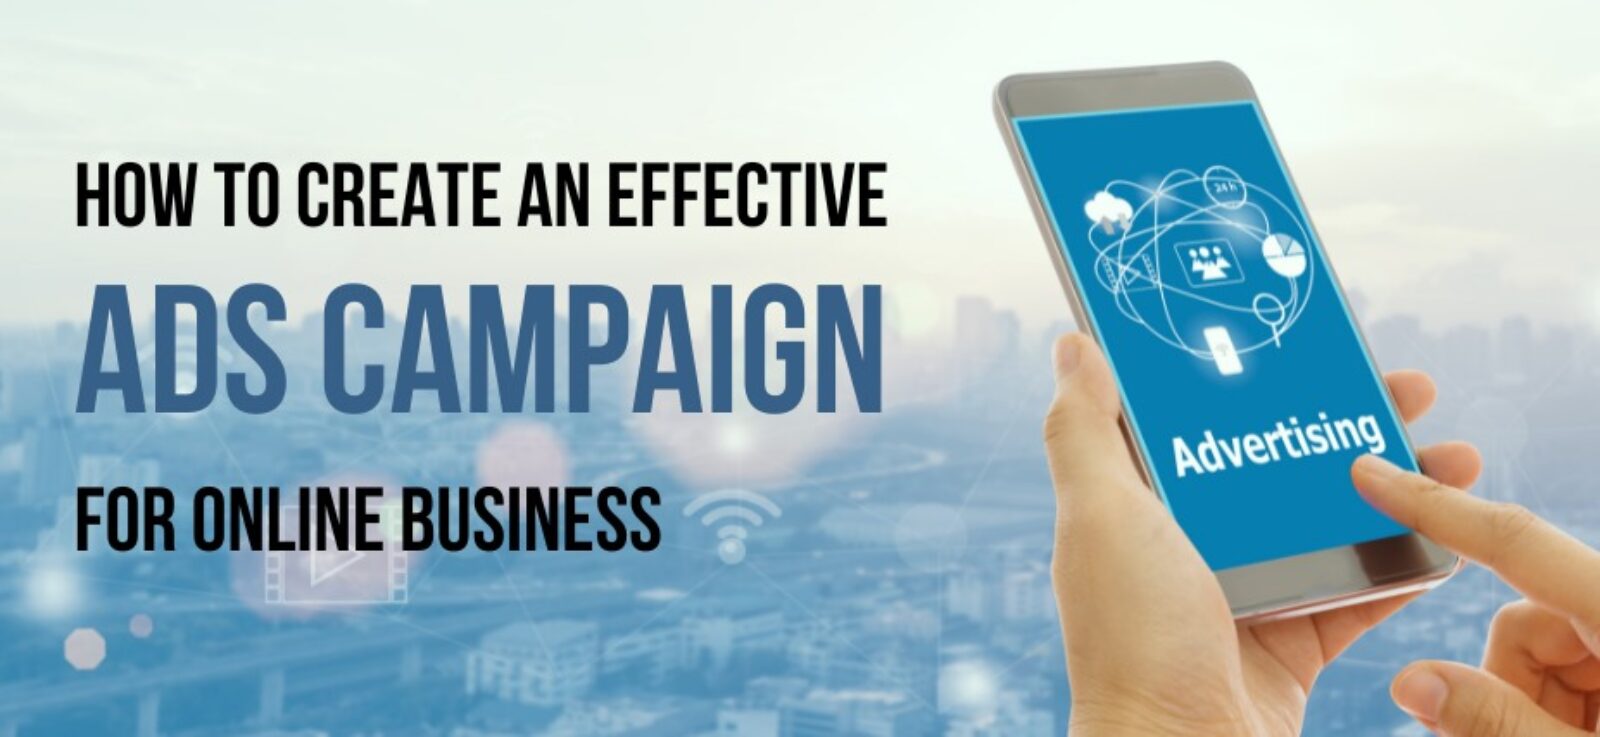 Effective Ads Campaign for Online Business